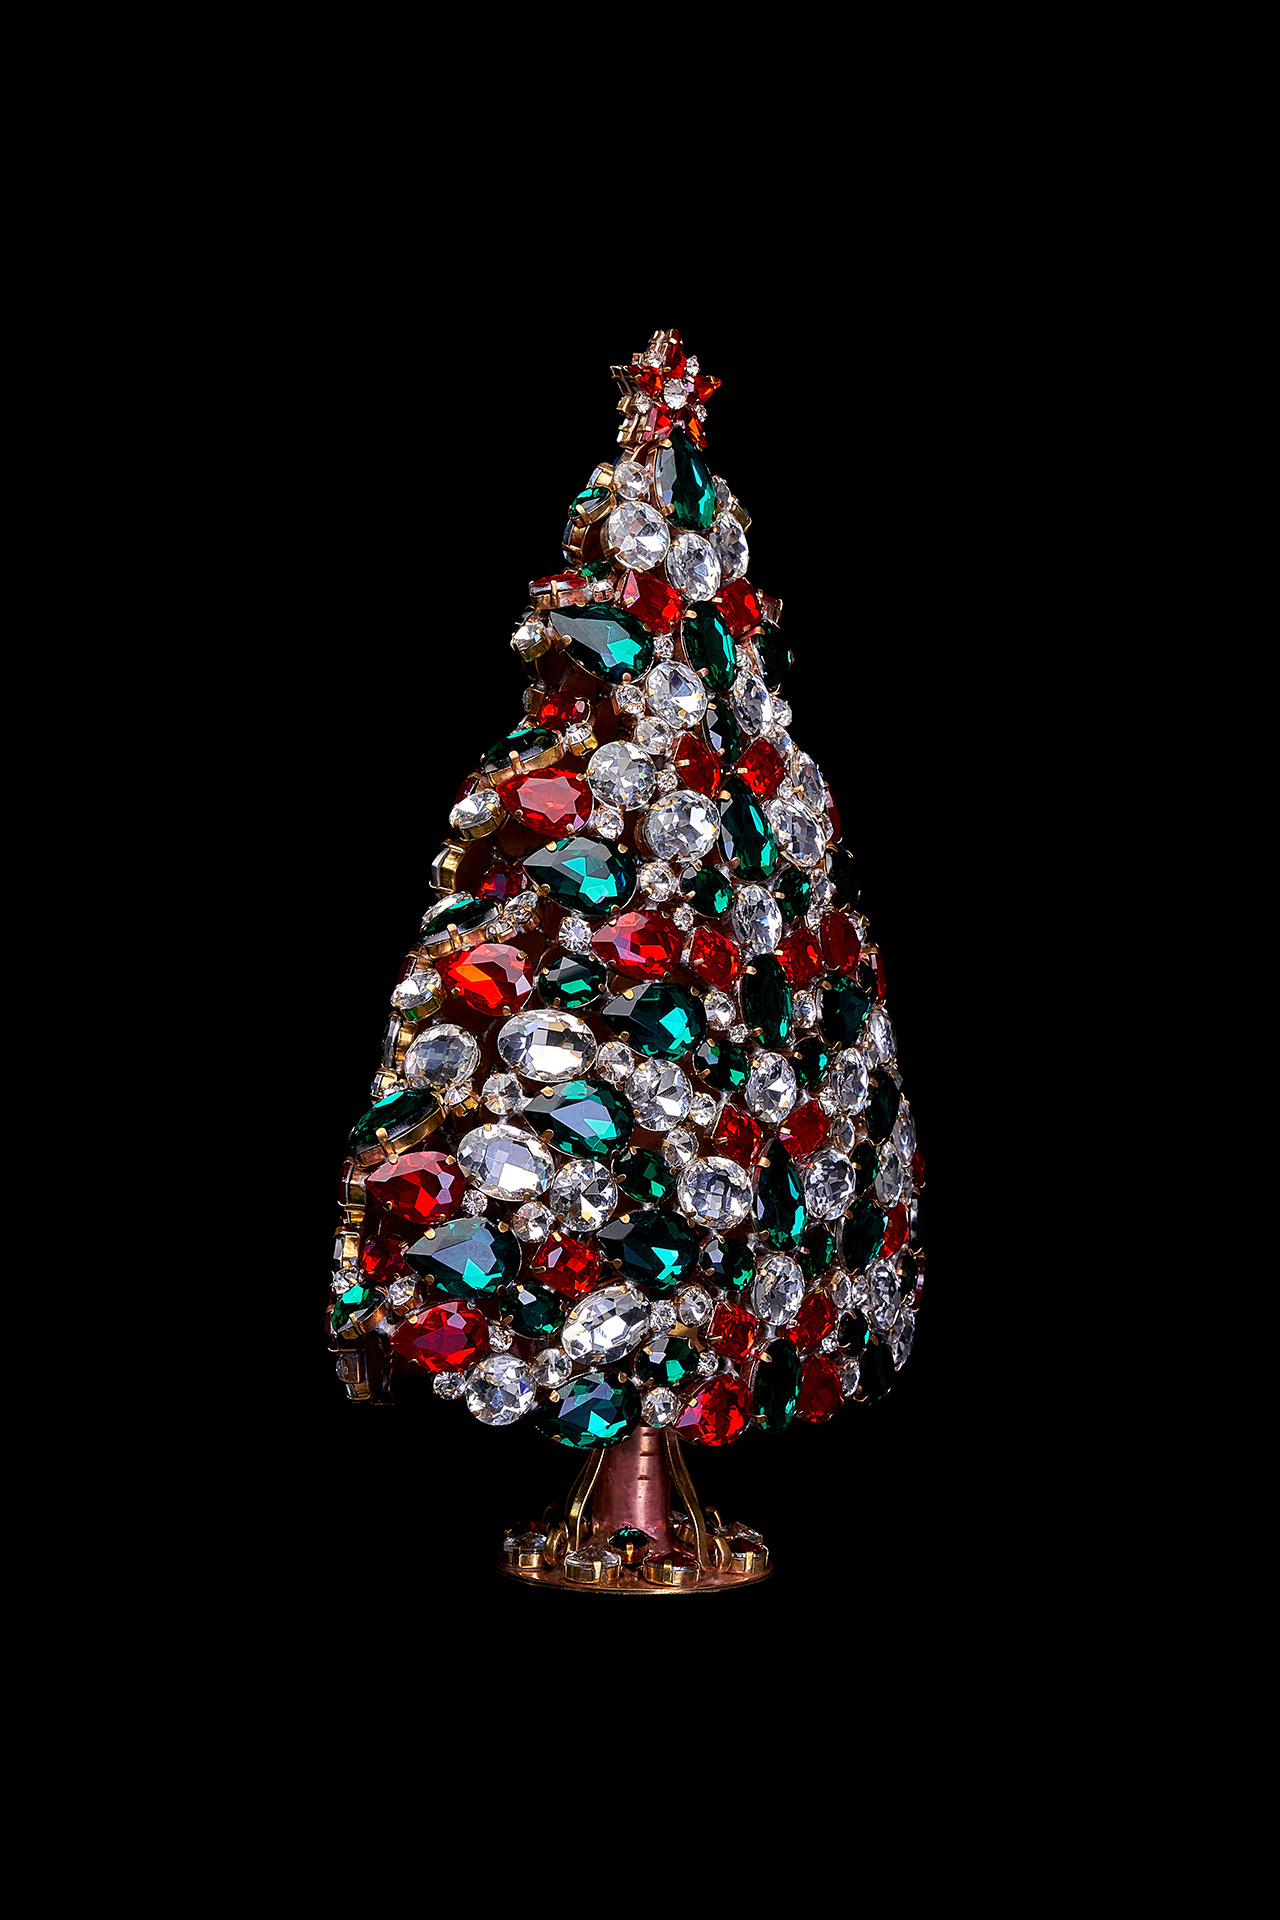 3D Christmas tree handcrafted from festive colors rhinestones